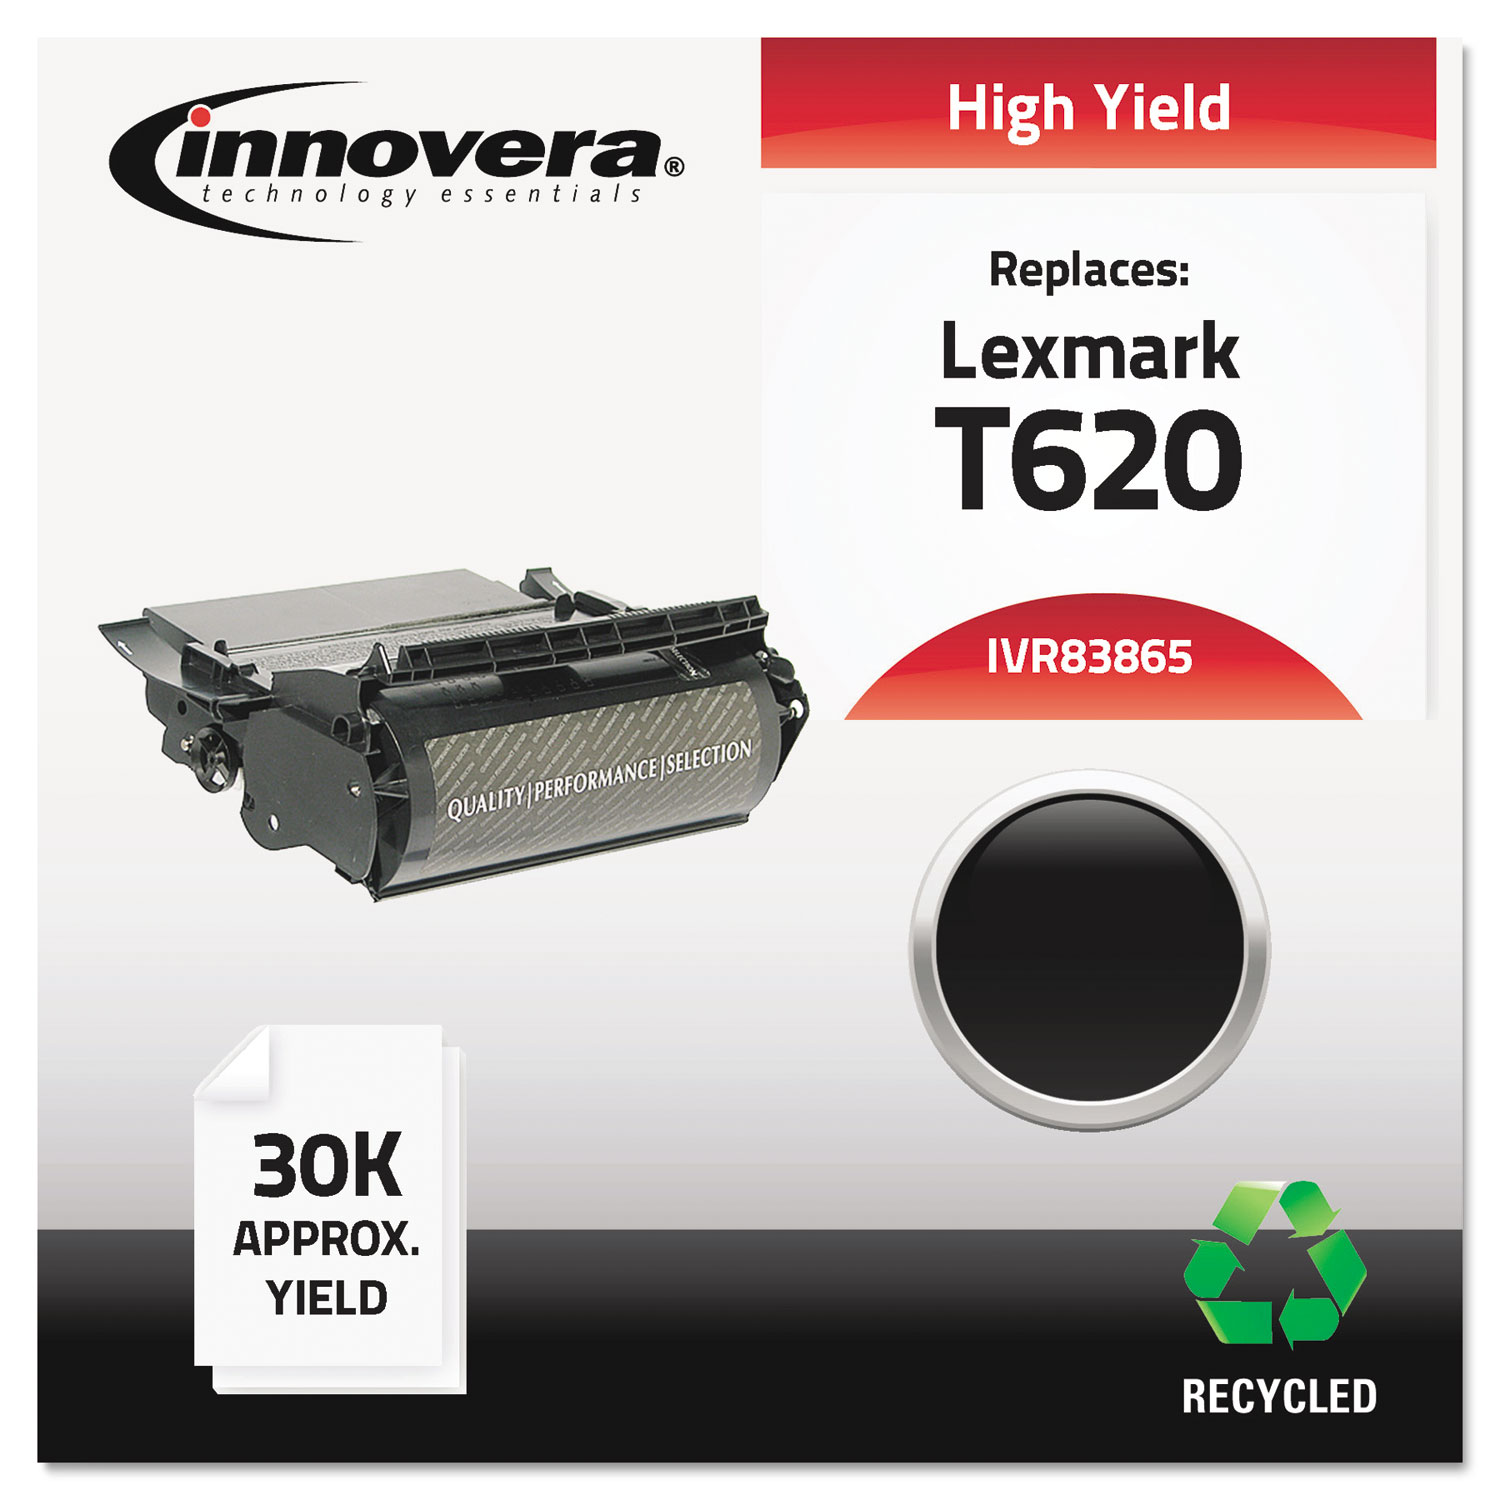 Remanufactured 12A6765 (T620) High-Yield Toner, Black